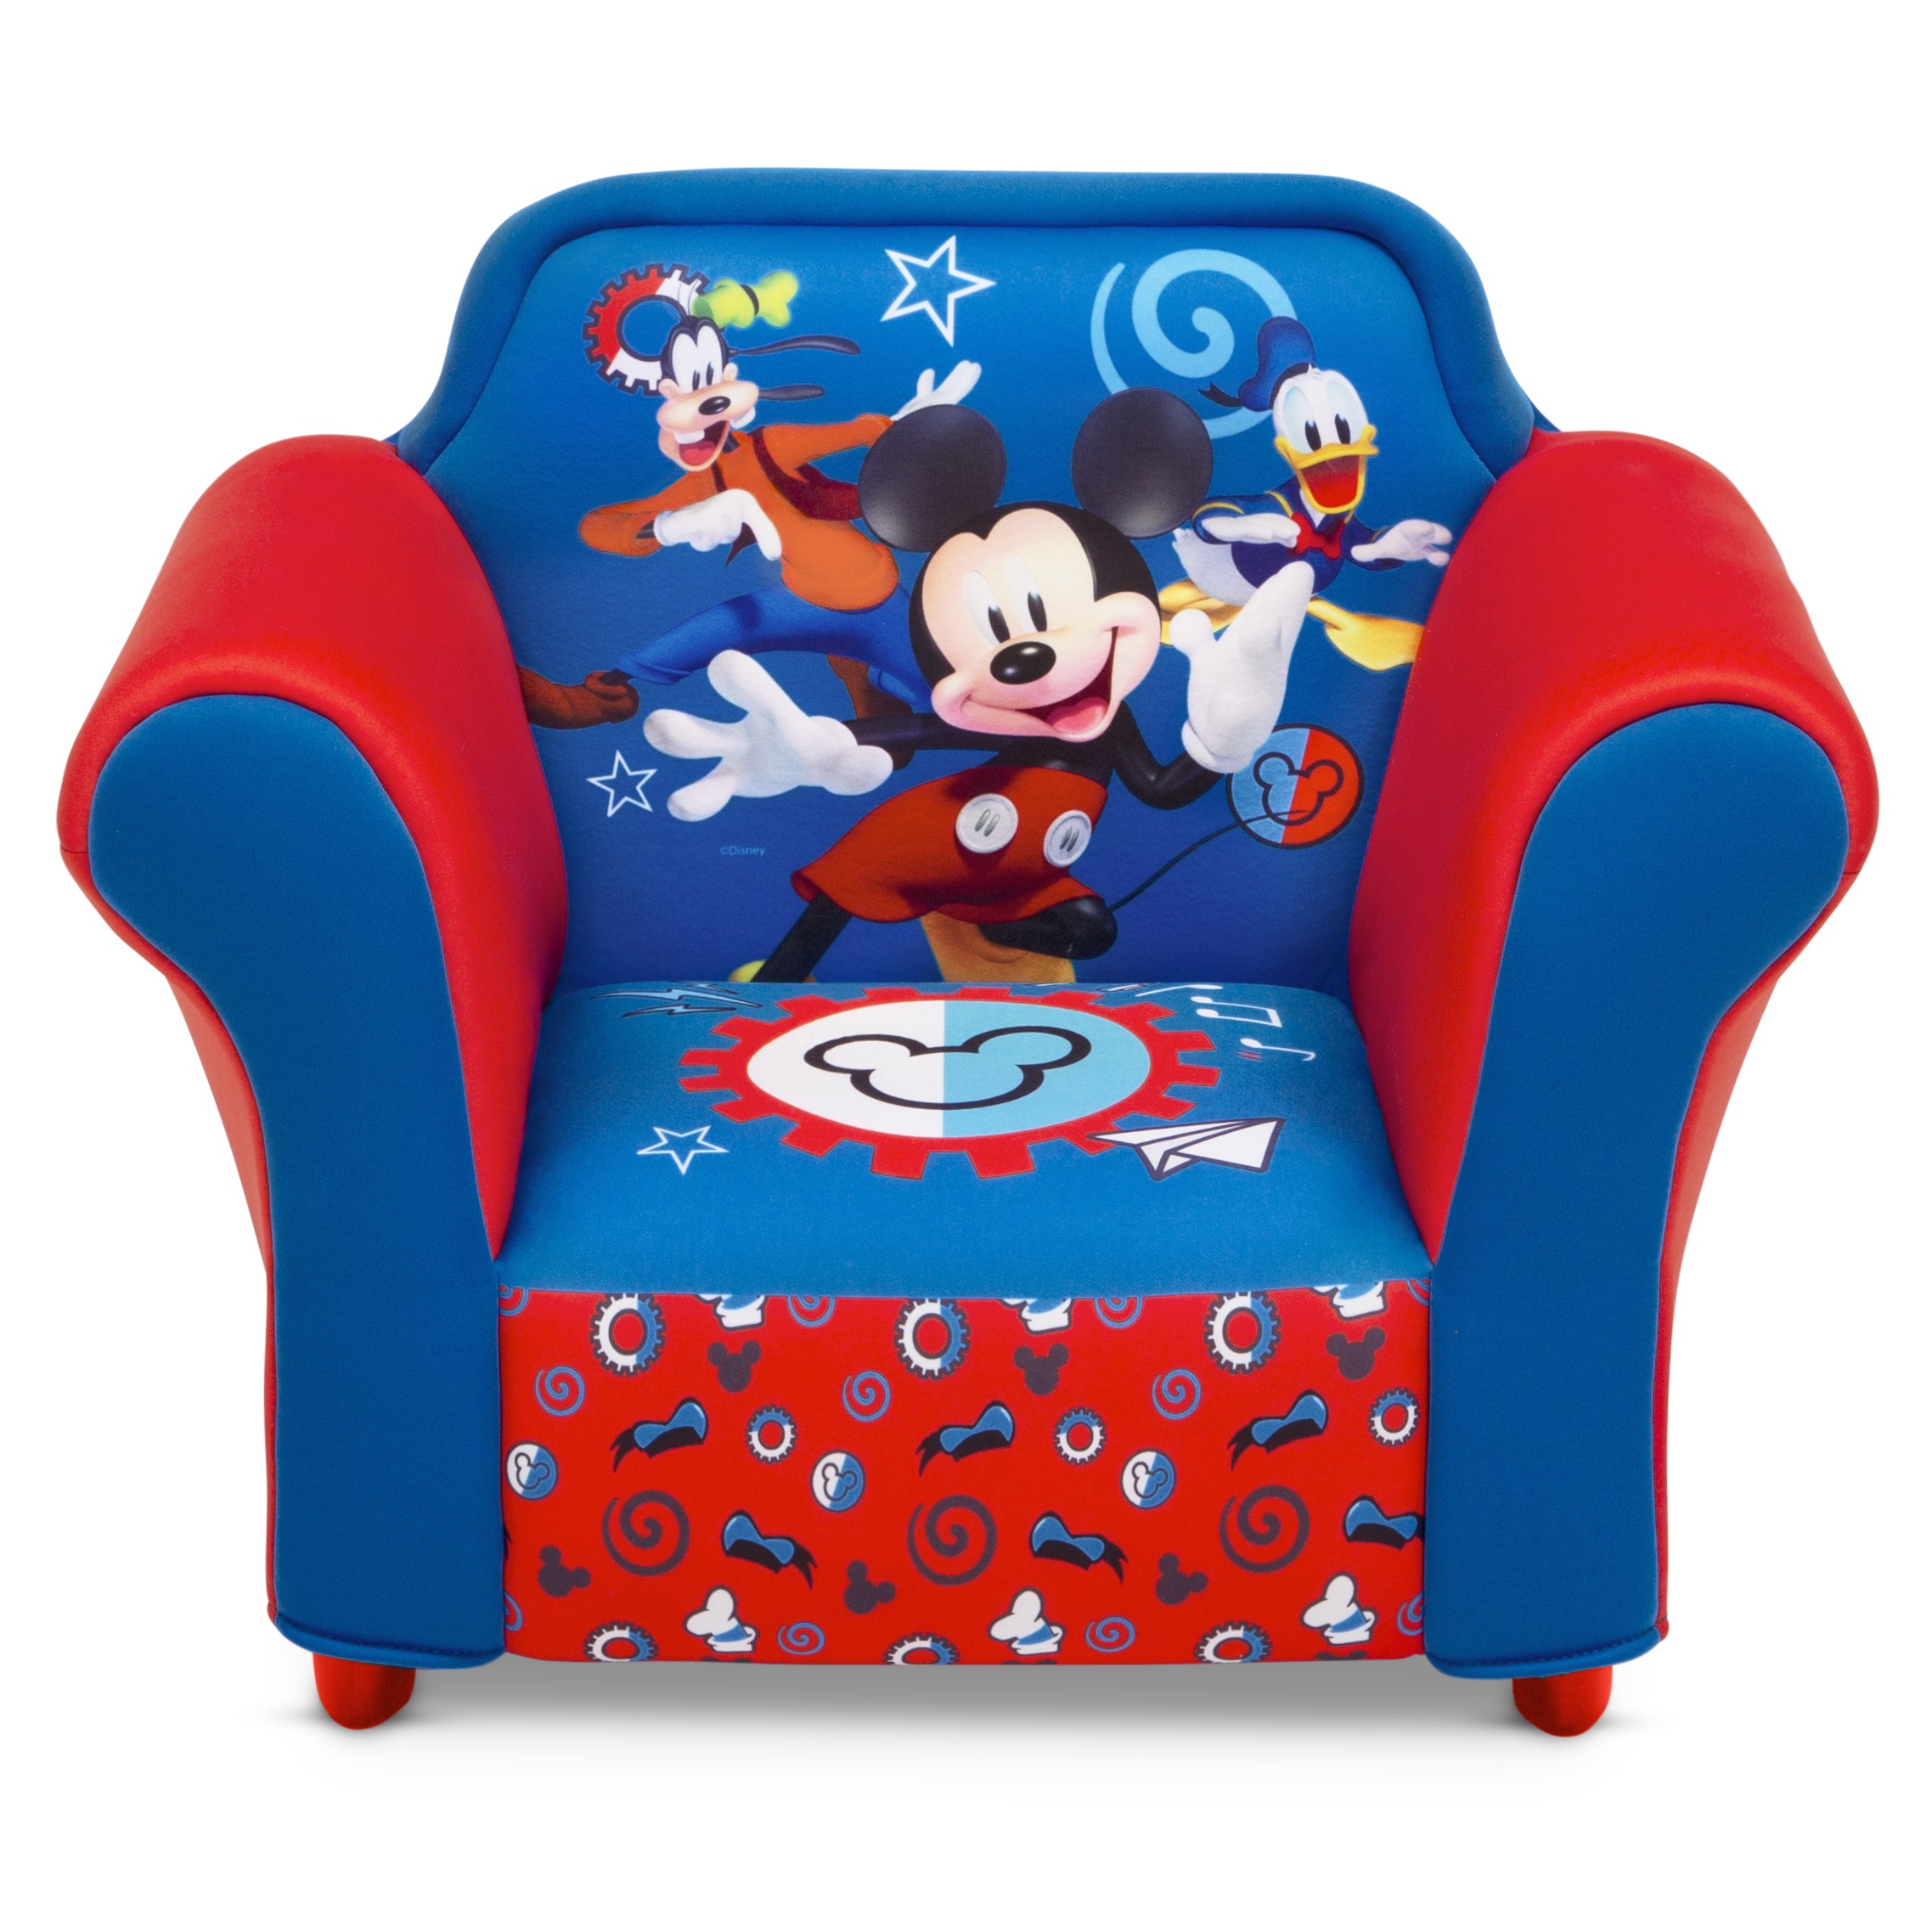 Disney Mickey Mouse Kids Upholstered Chair with Sculpted Plastic Frame by Delta Children - image 1 of 6